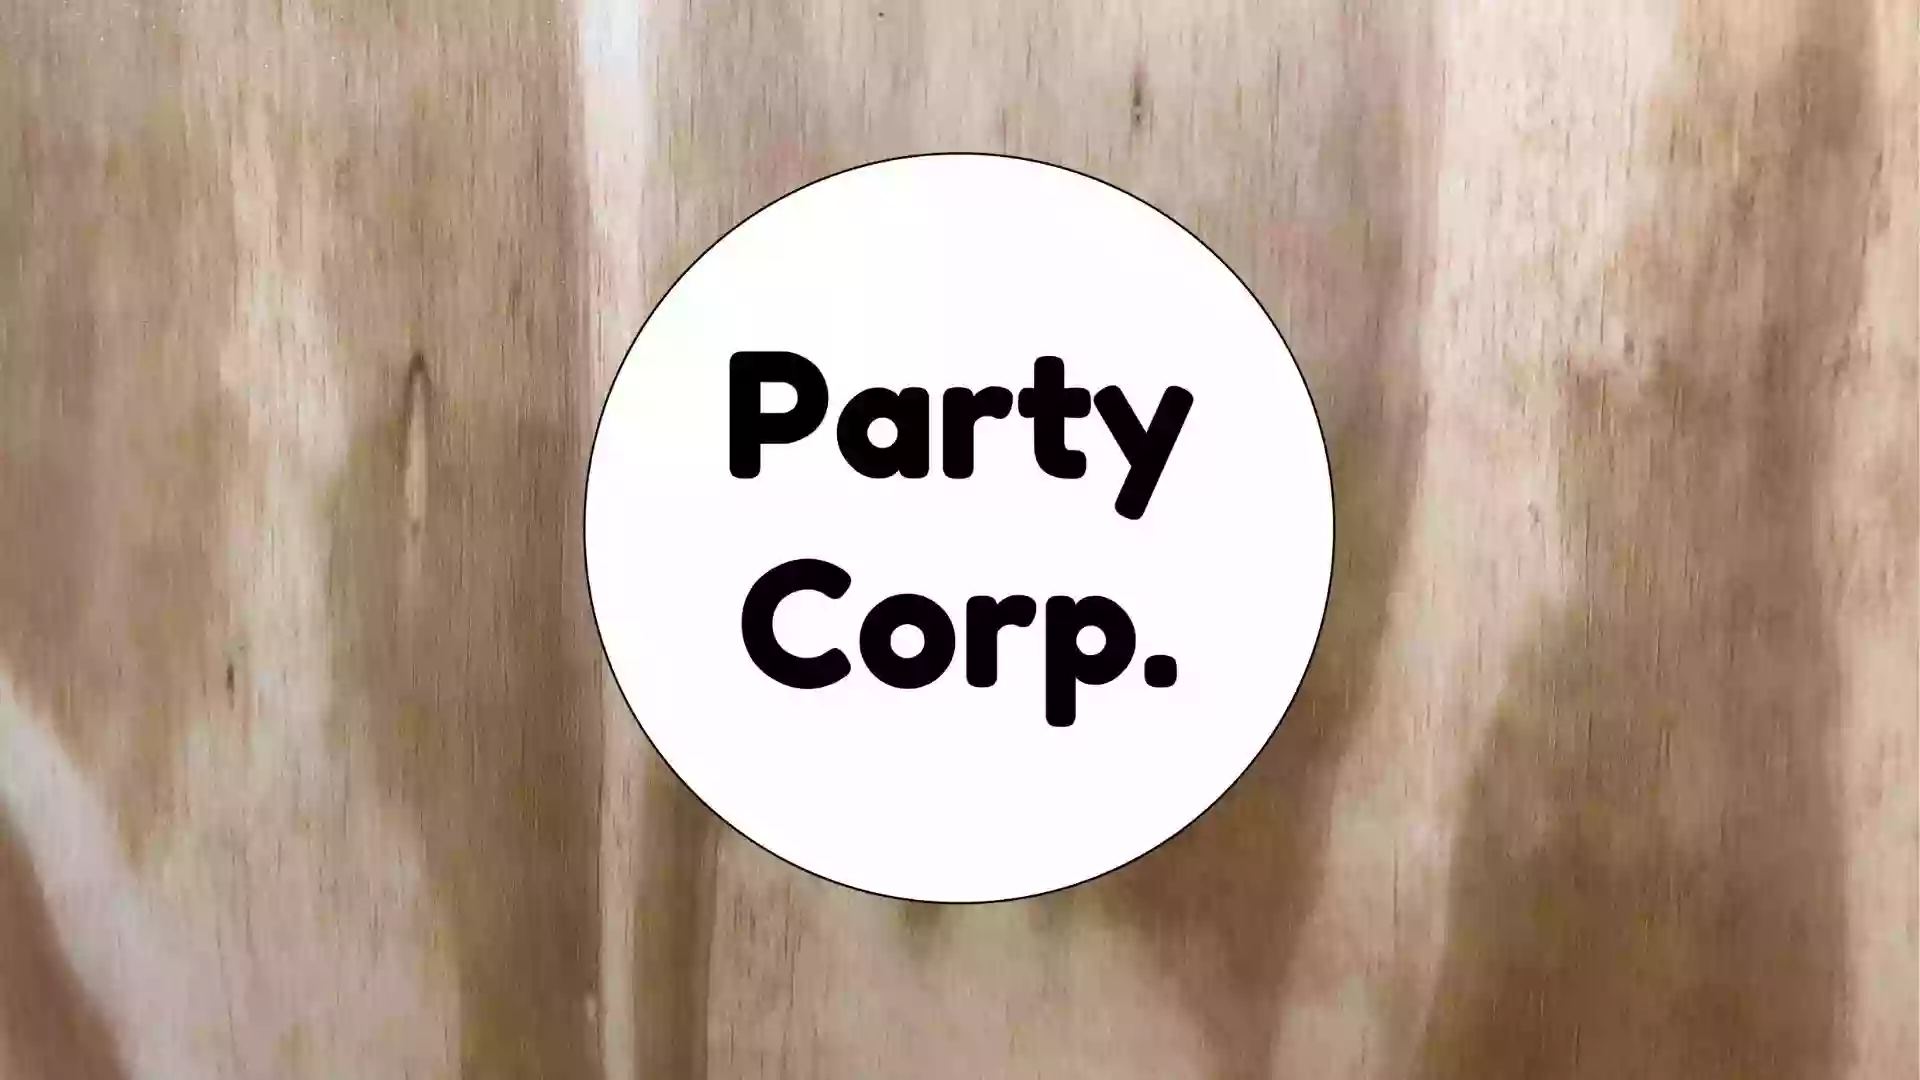 Party Corp